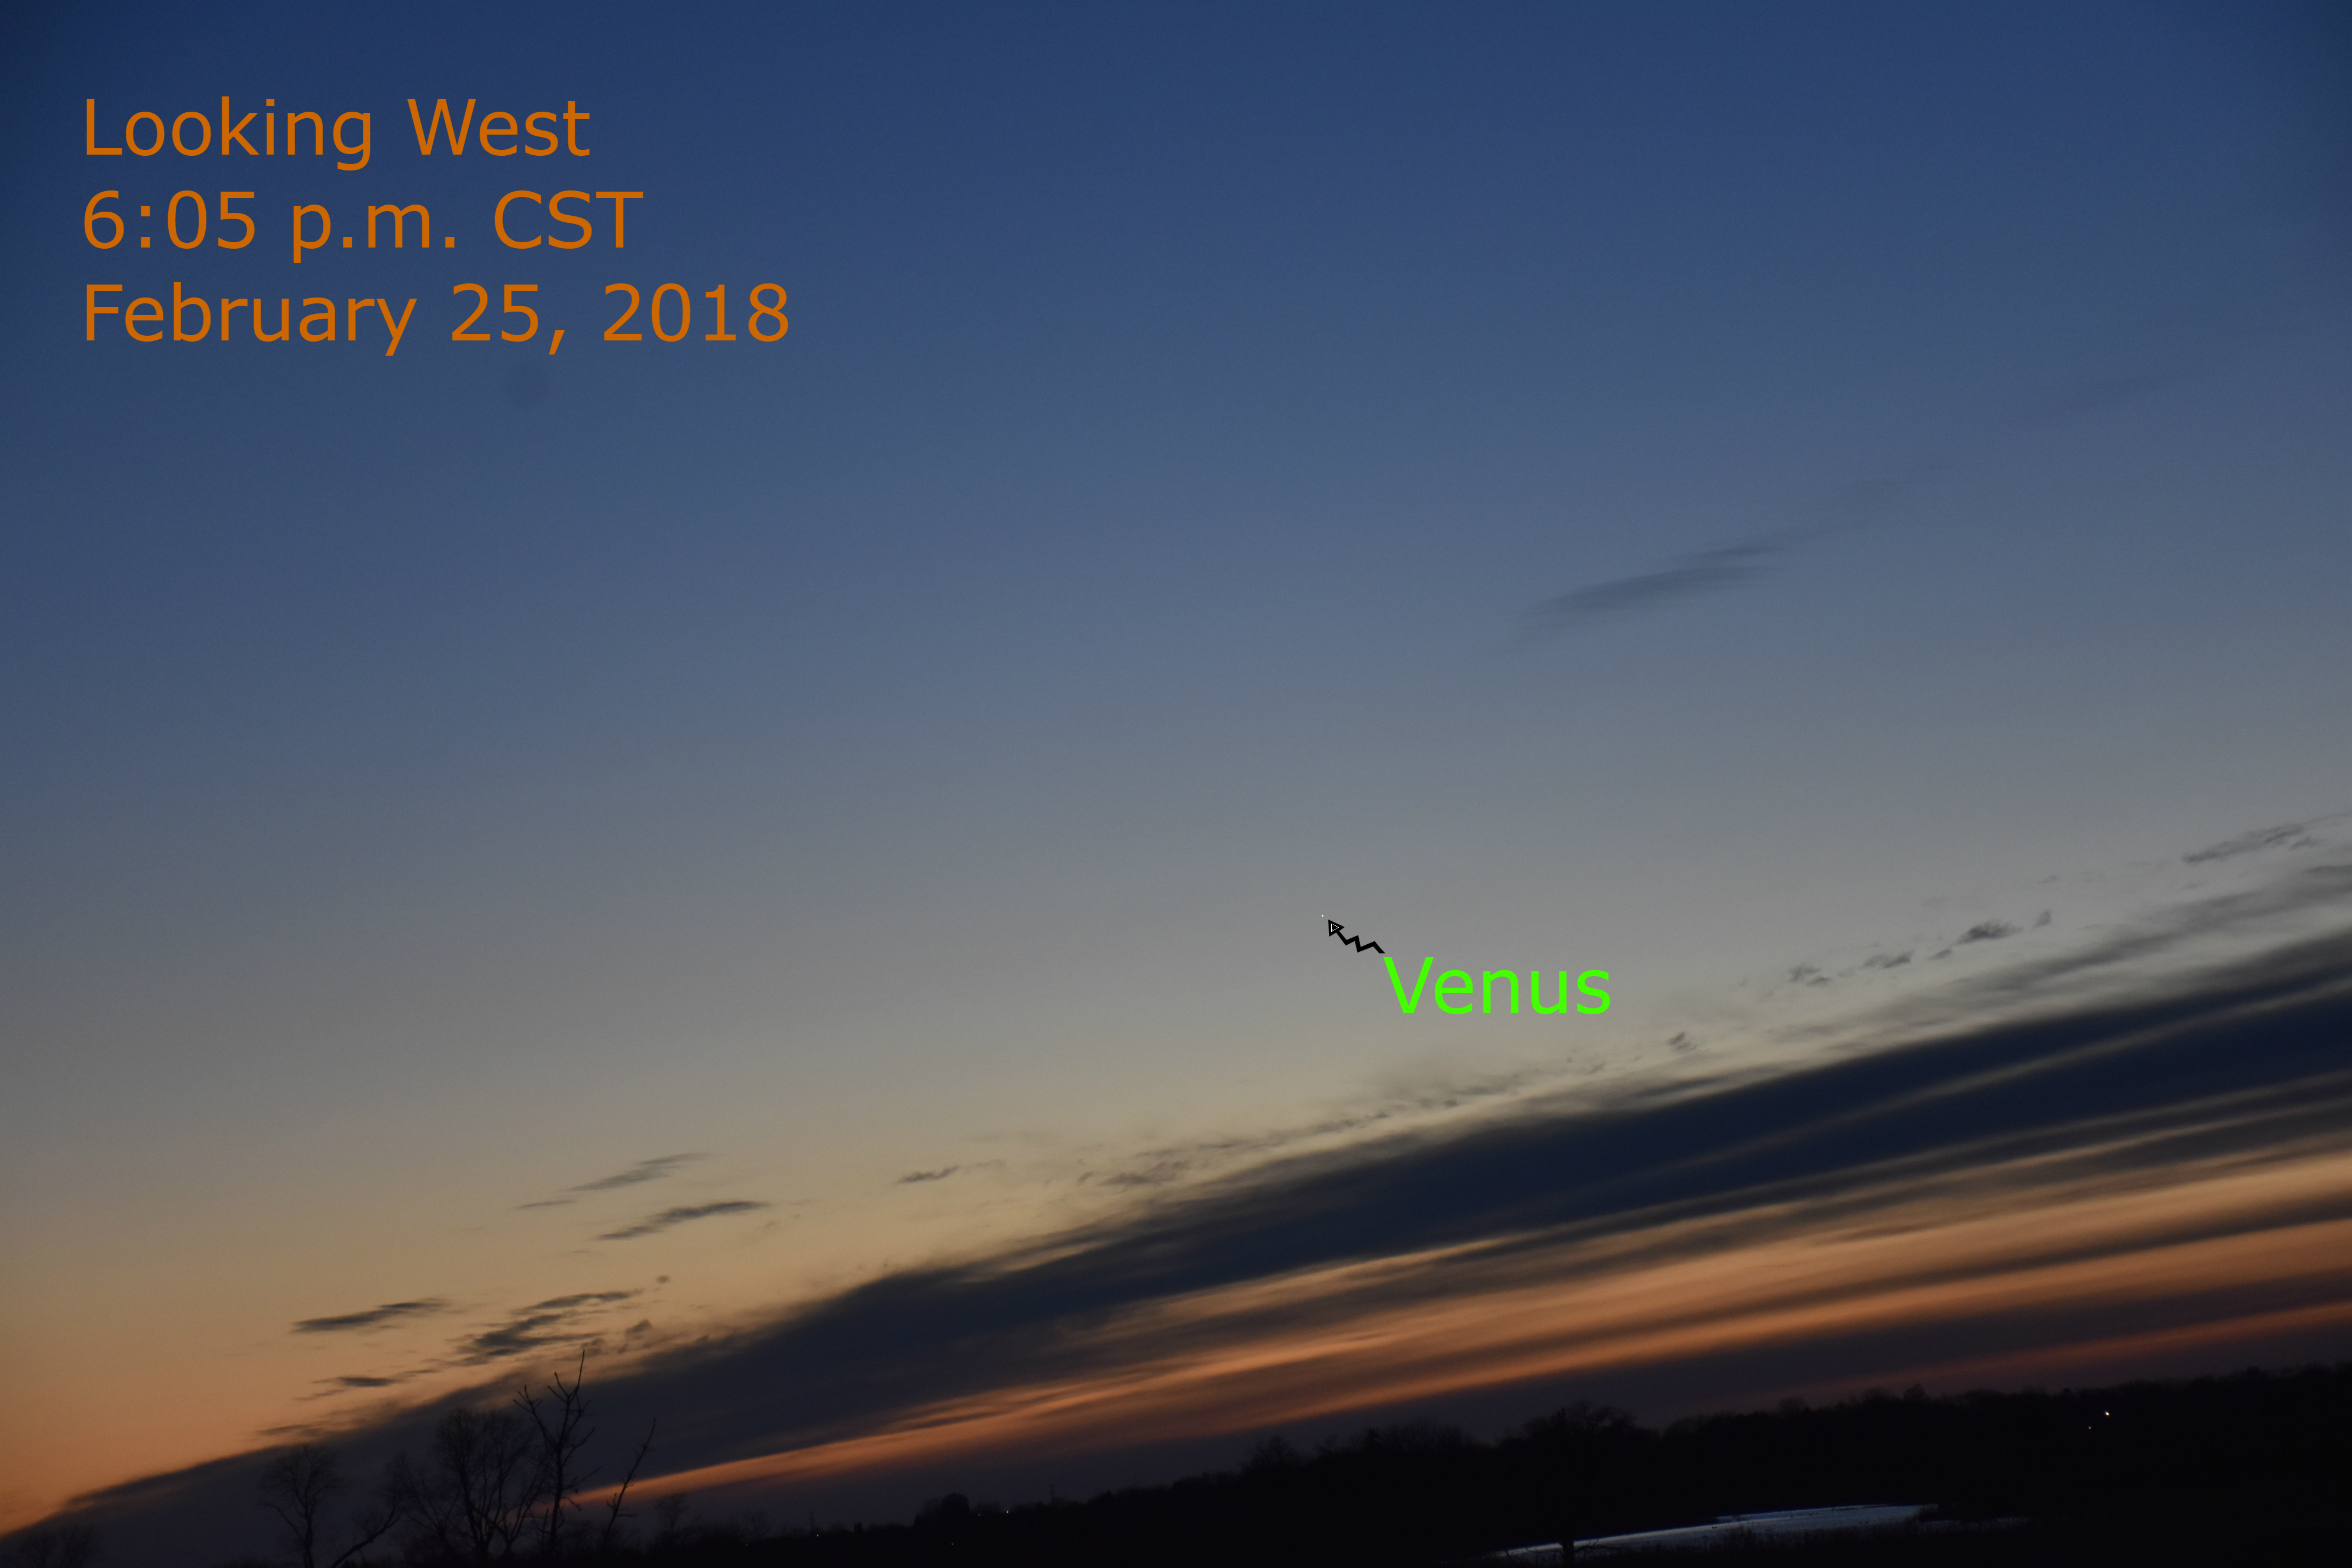 2018: Venus the Evening Star | When the Curves Line Up